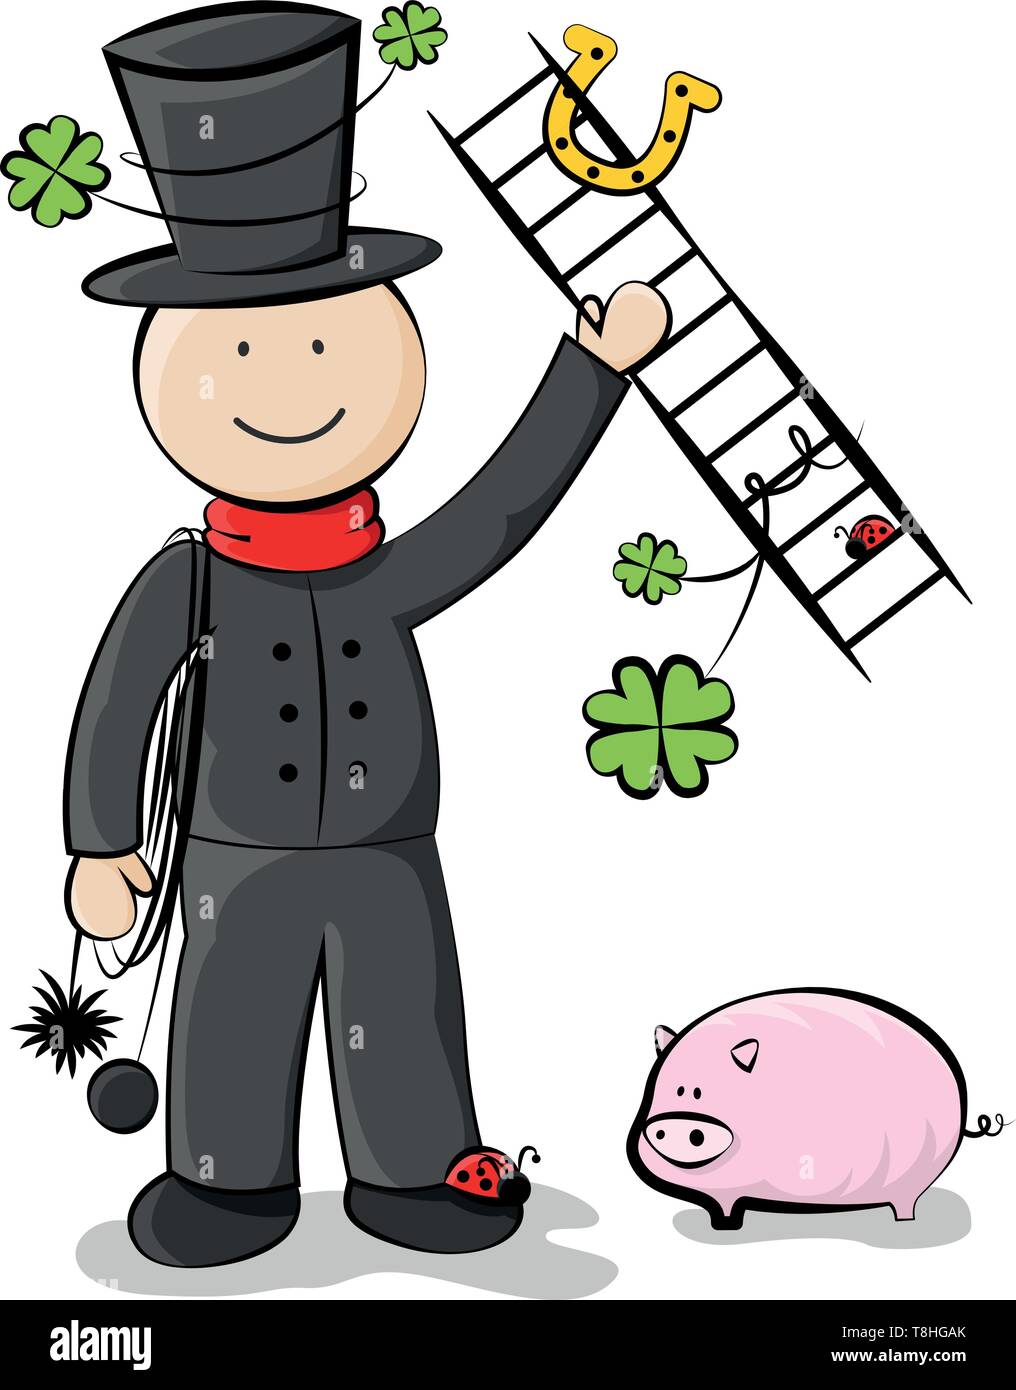 new year chimney sweeper vector Stock Vector